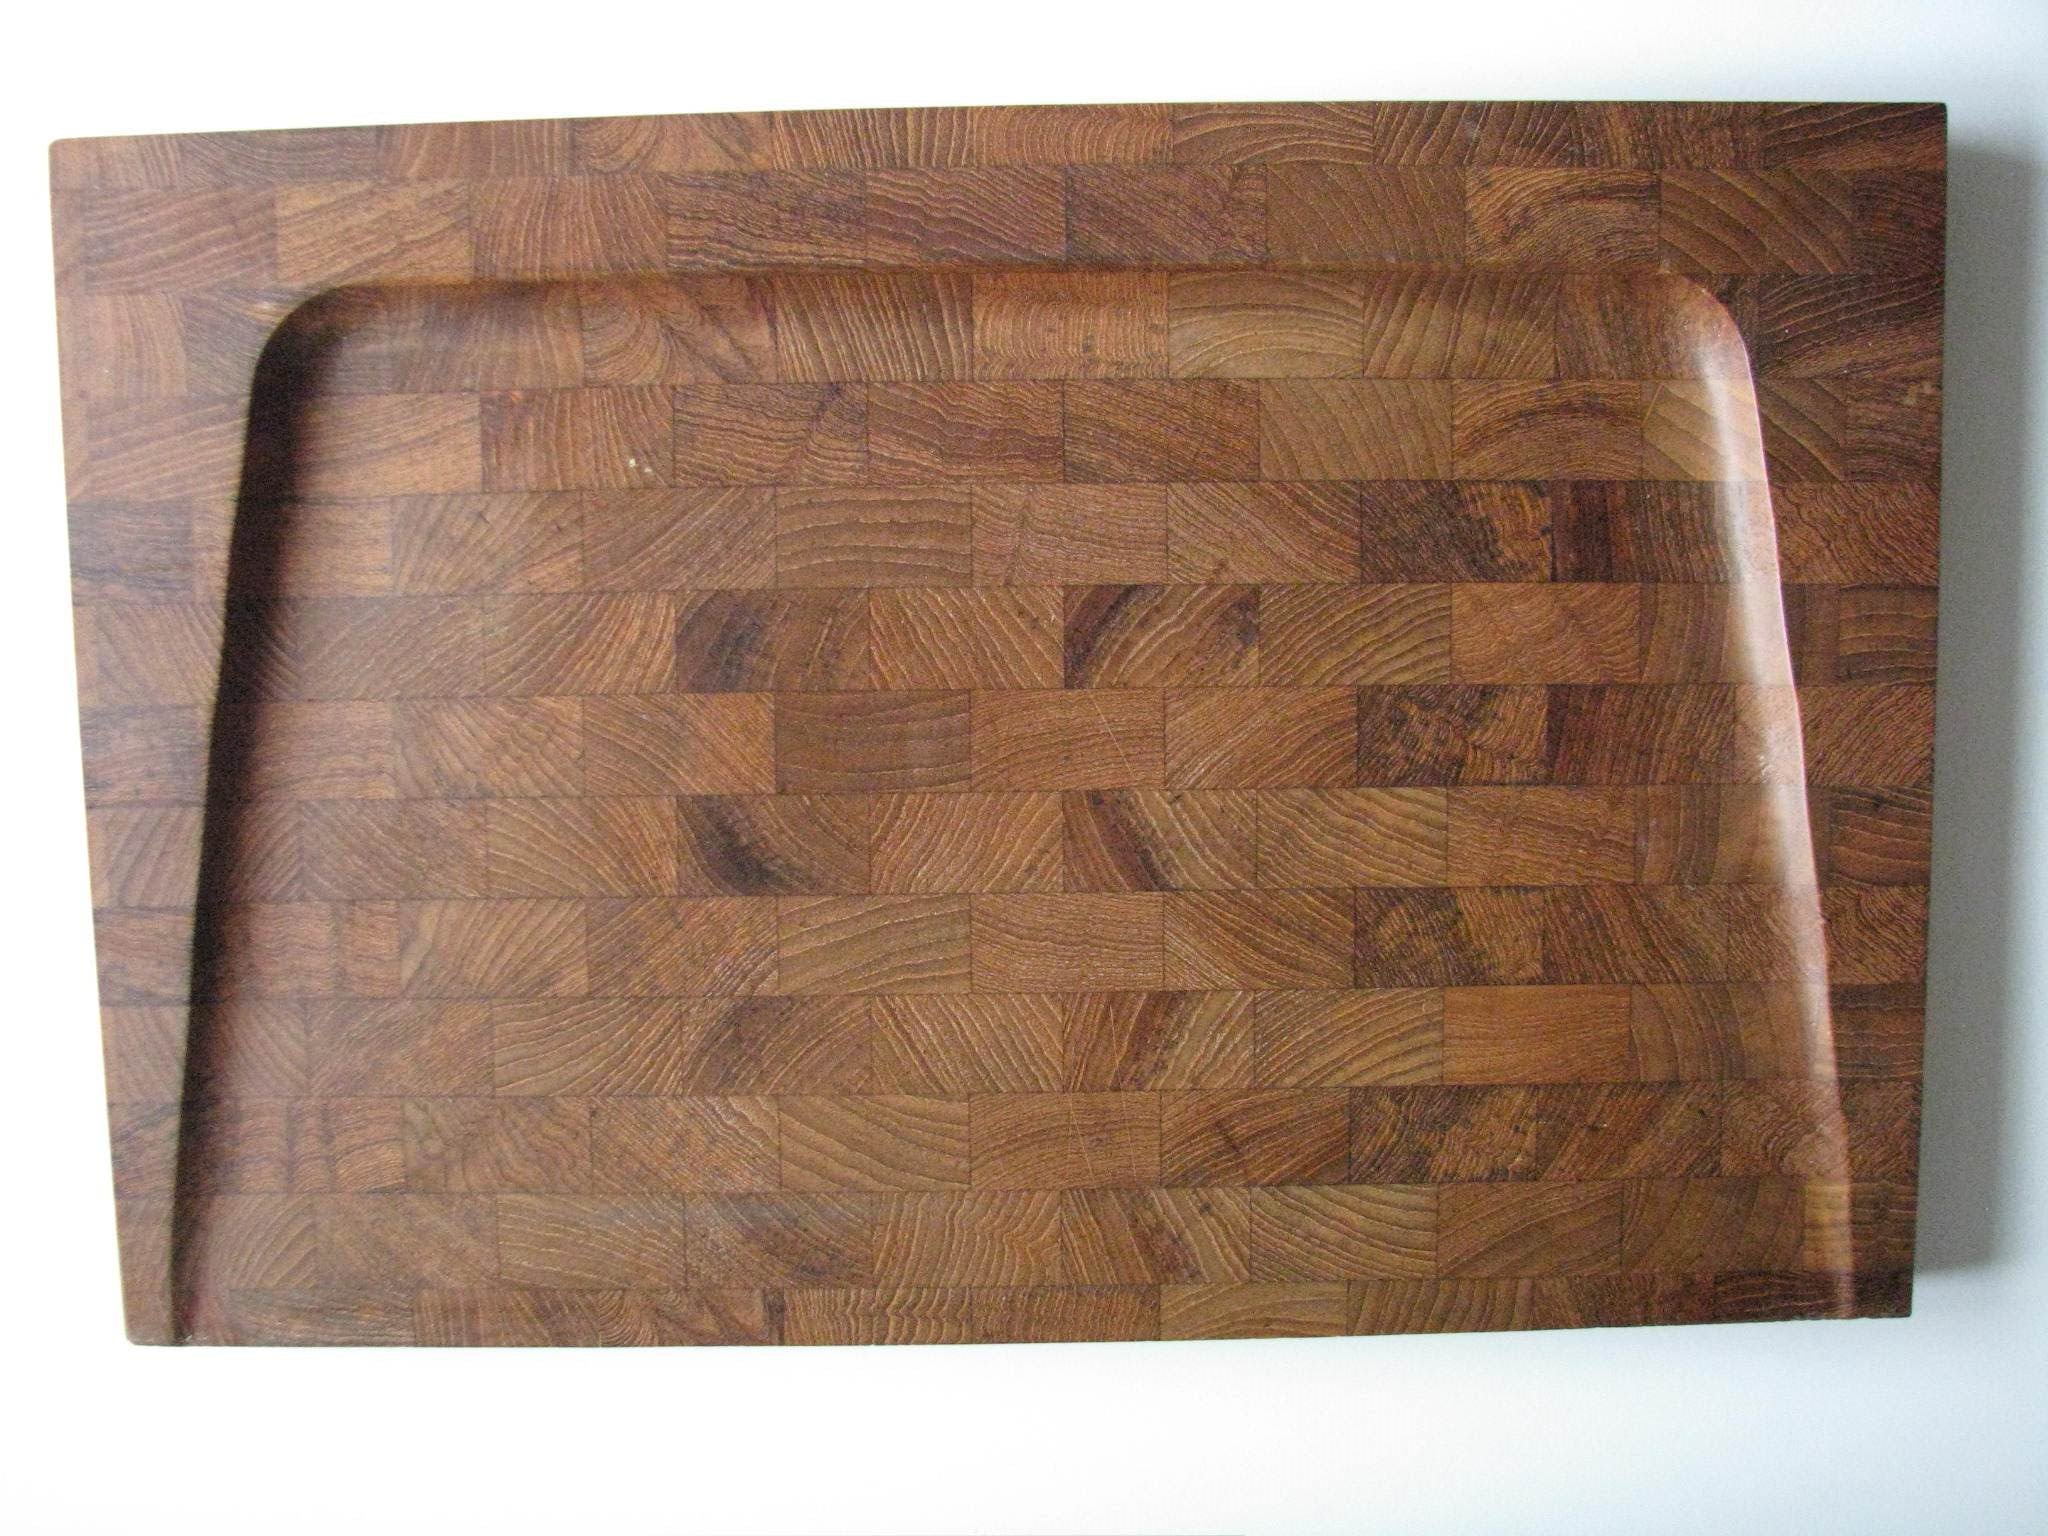 edgebrookhouse - 1960s Large Digsmed Teak Cutting Board or Serving Tray Made in Denmark